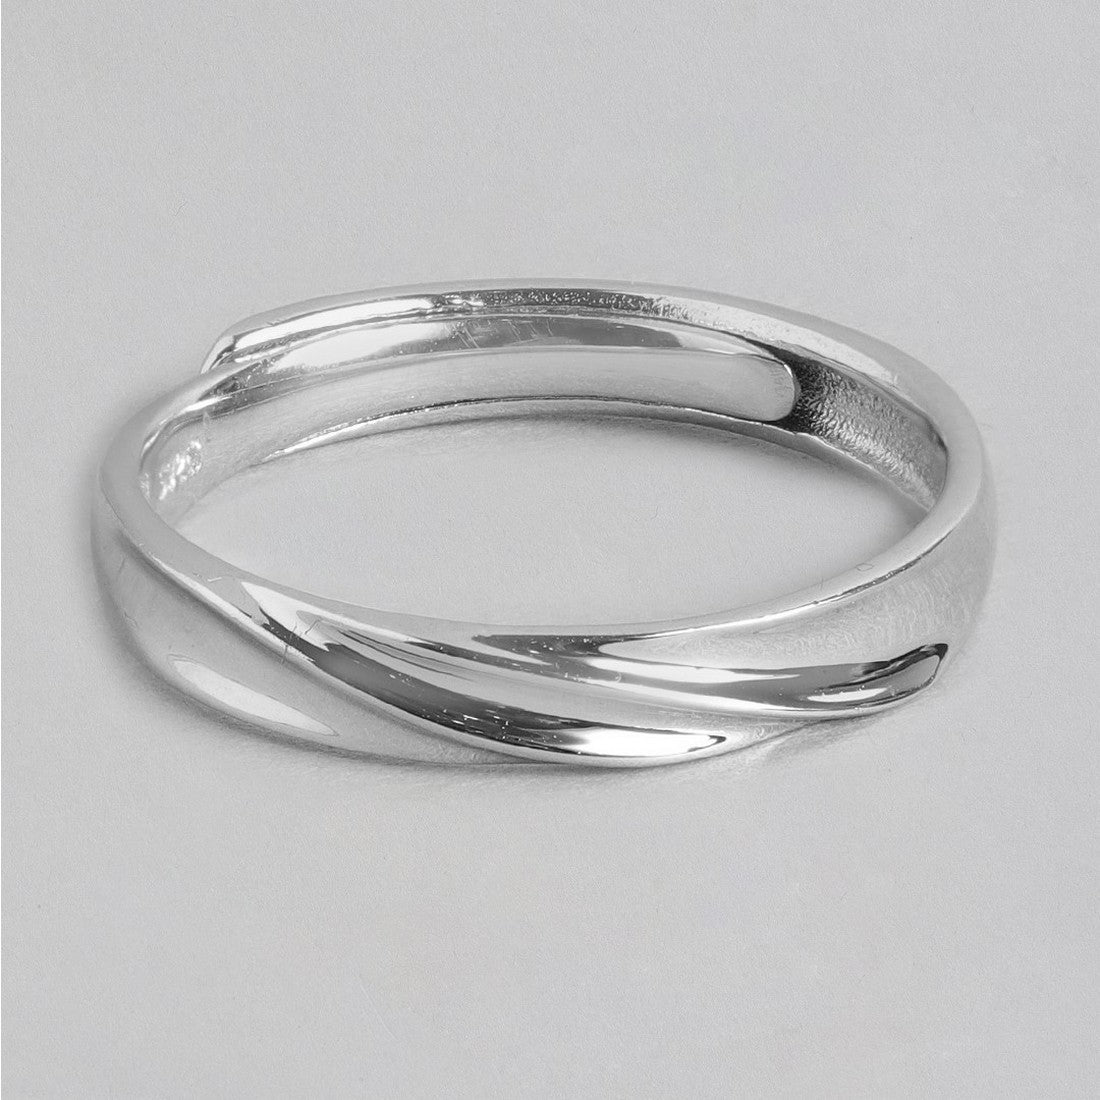 Minimalistic CZ 925 Sterling Silver Ring For Him